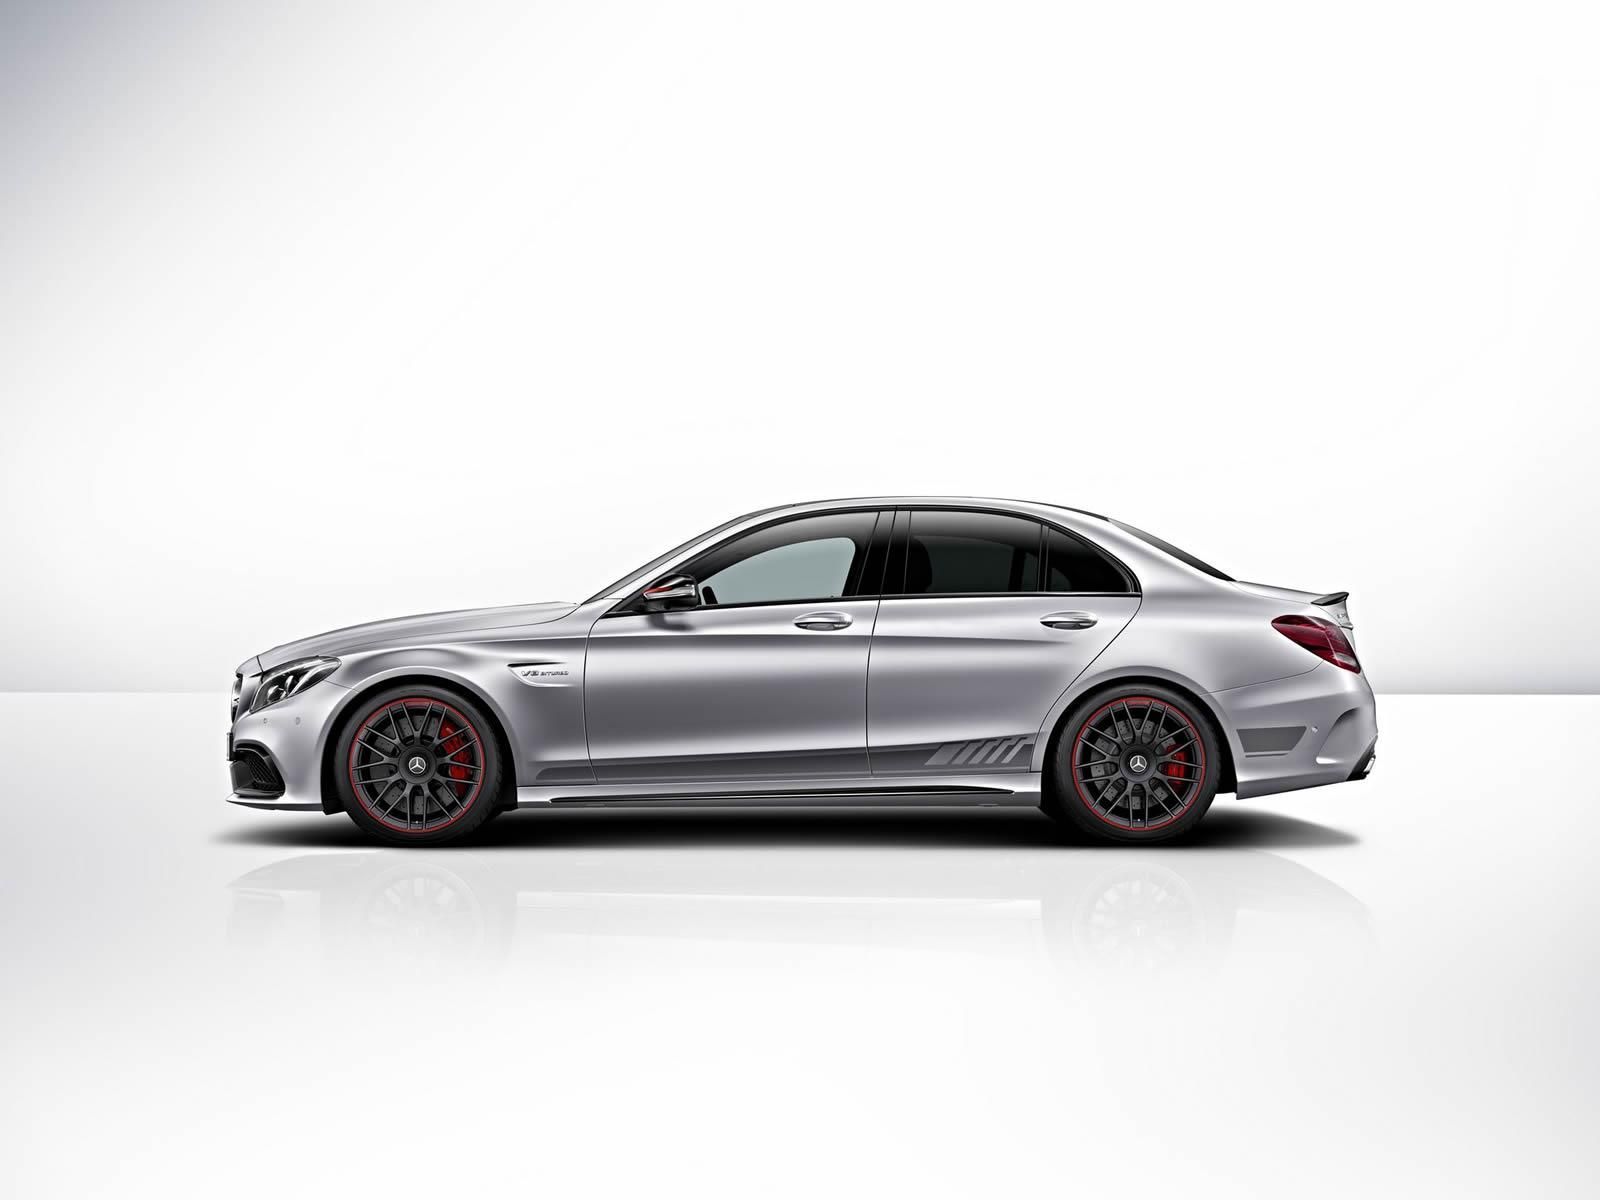 MERCEDES C63 AMG S EDTON 1 RESM GALERS